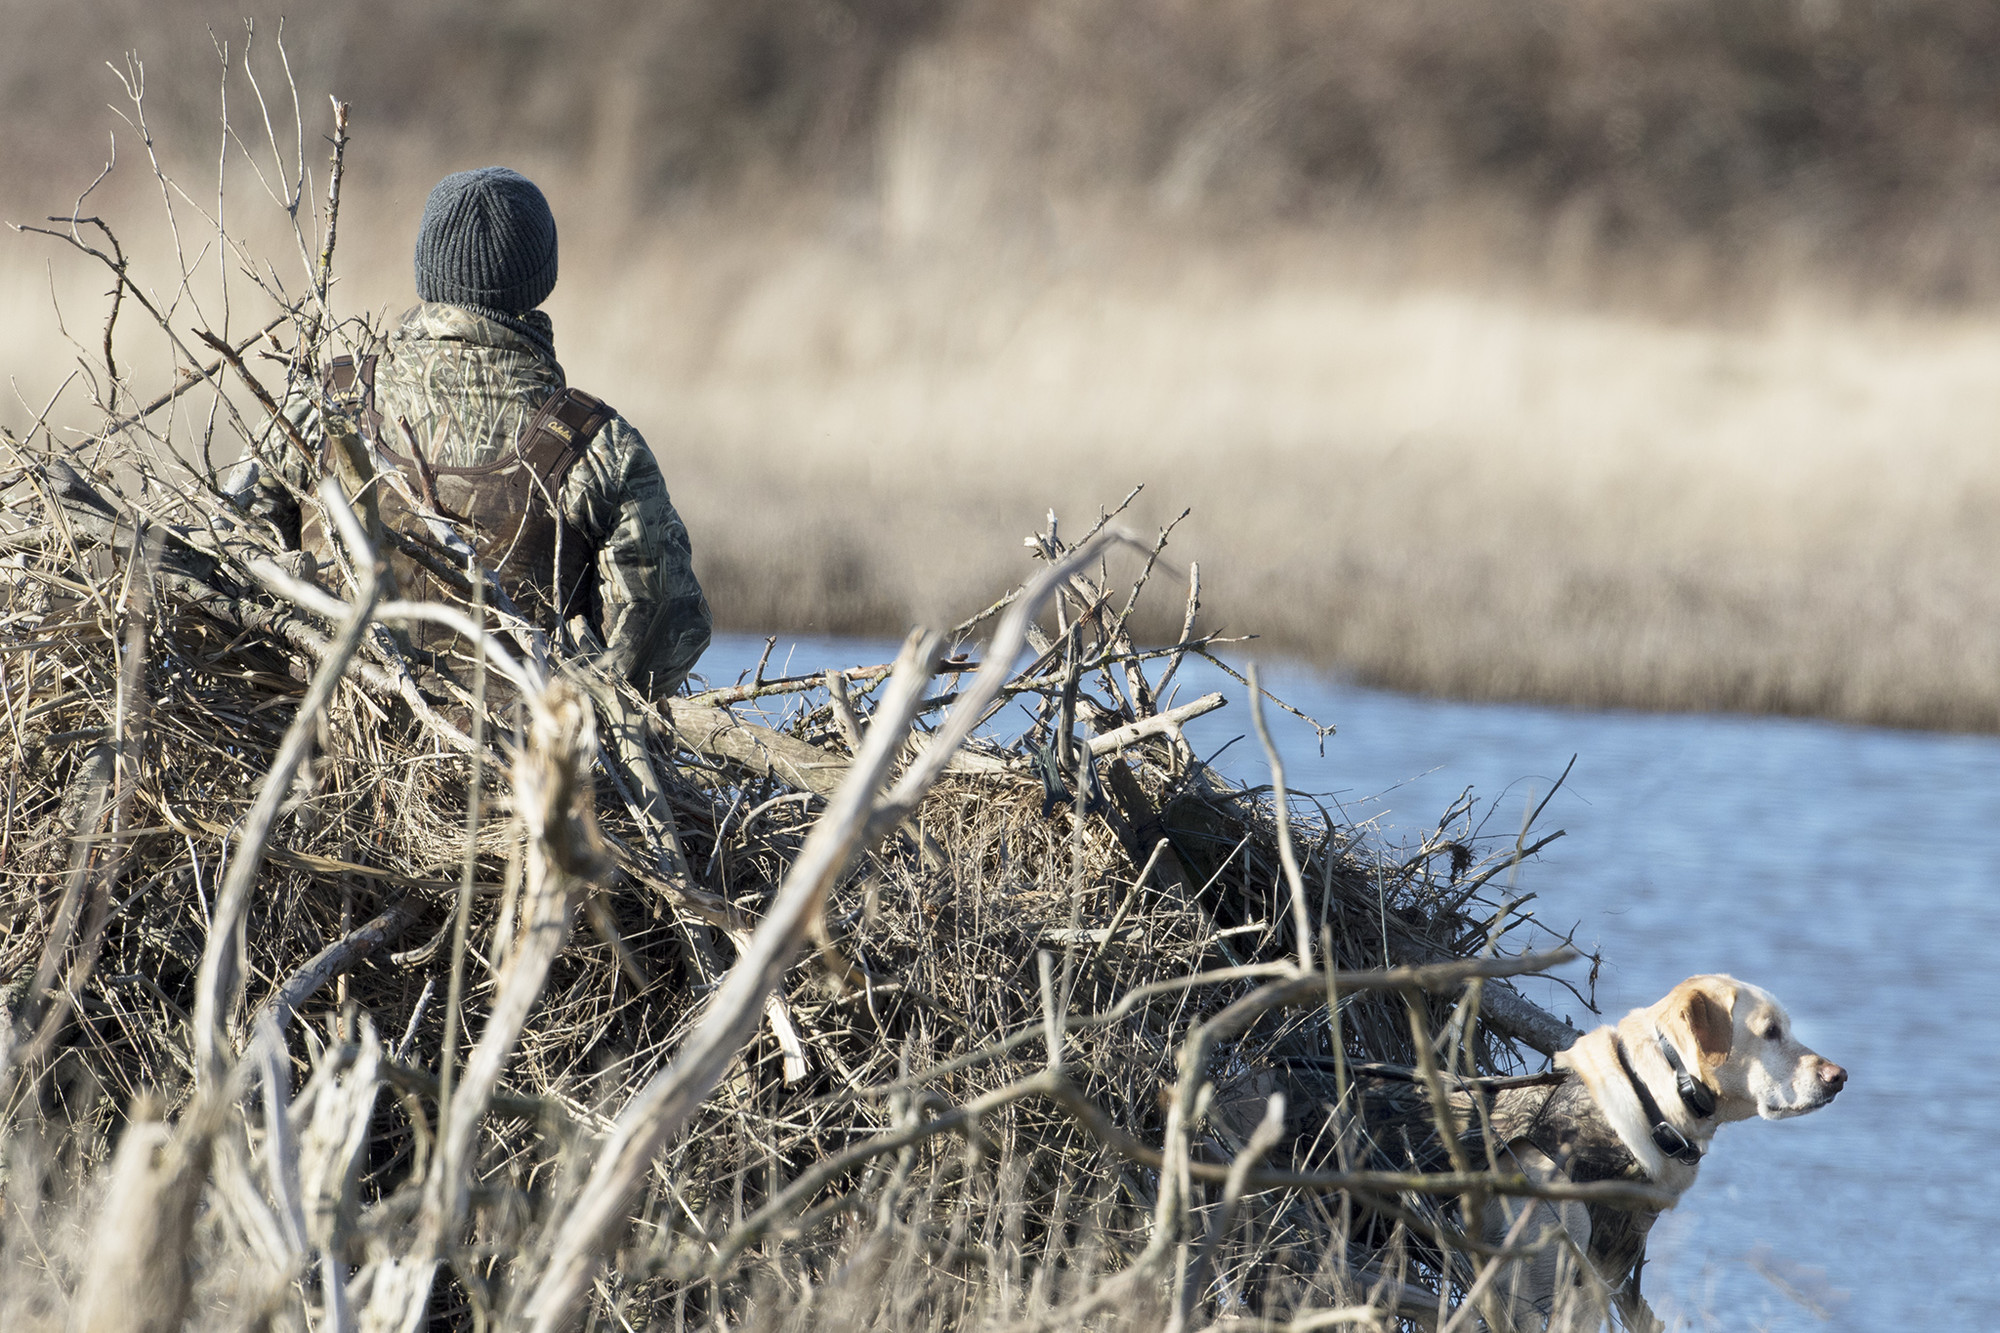 Hunter with dog at waterfowl hunting blind